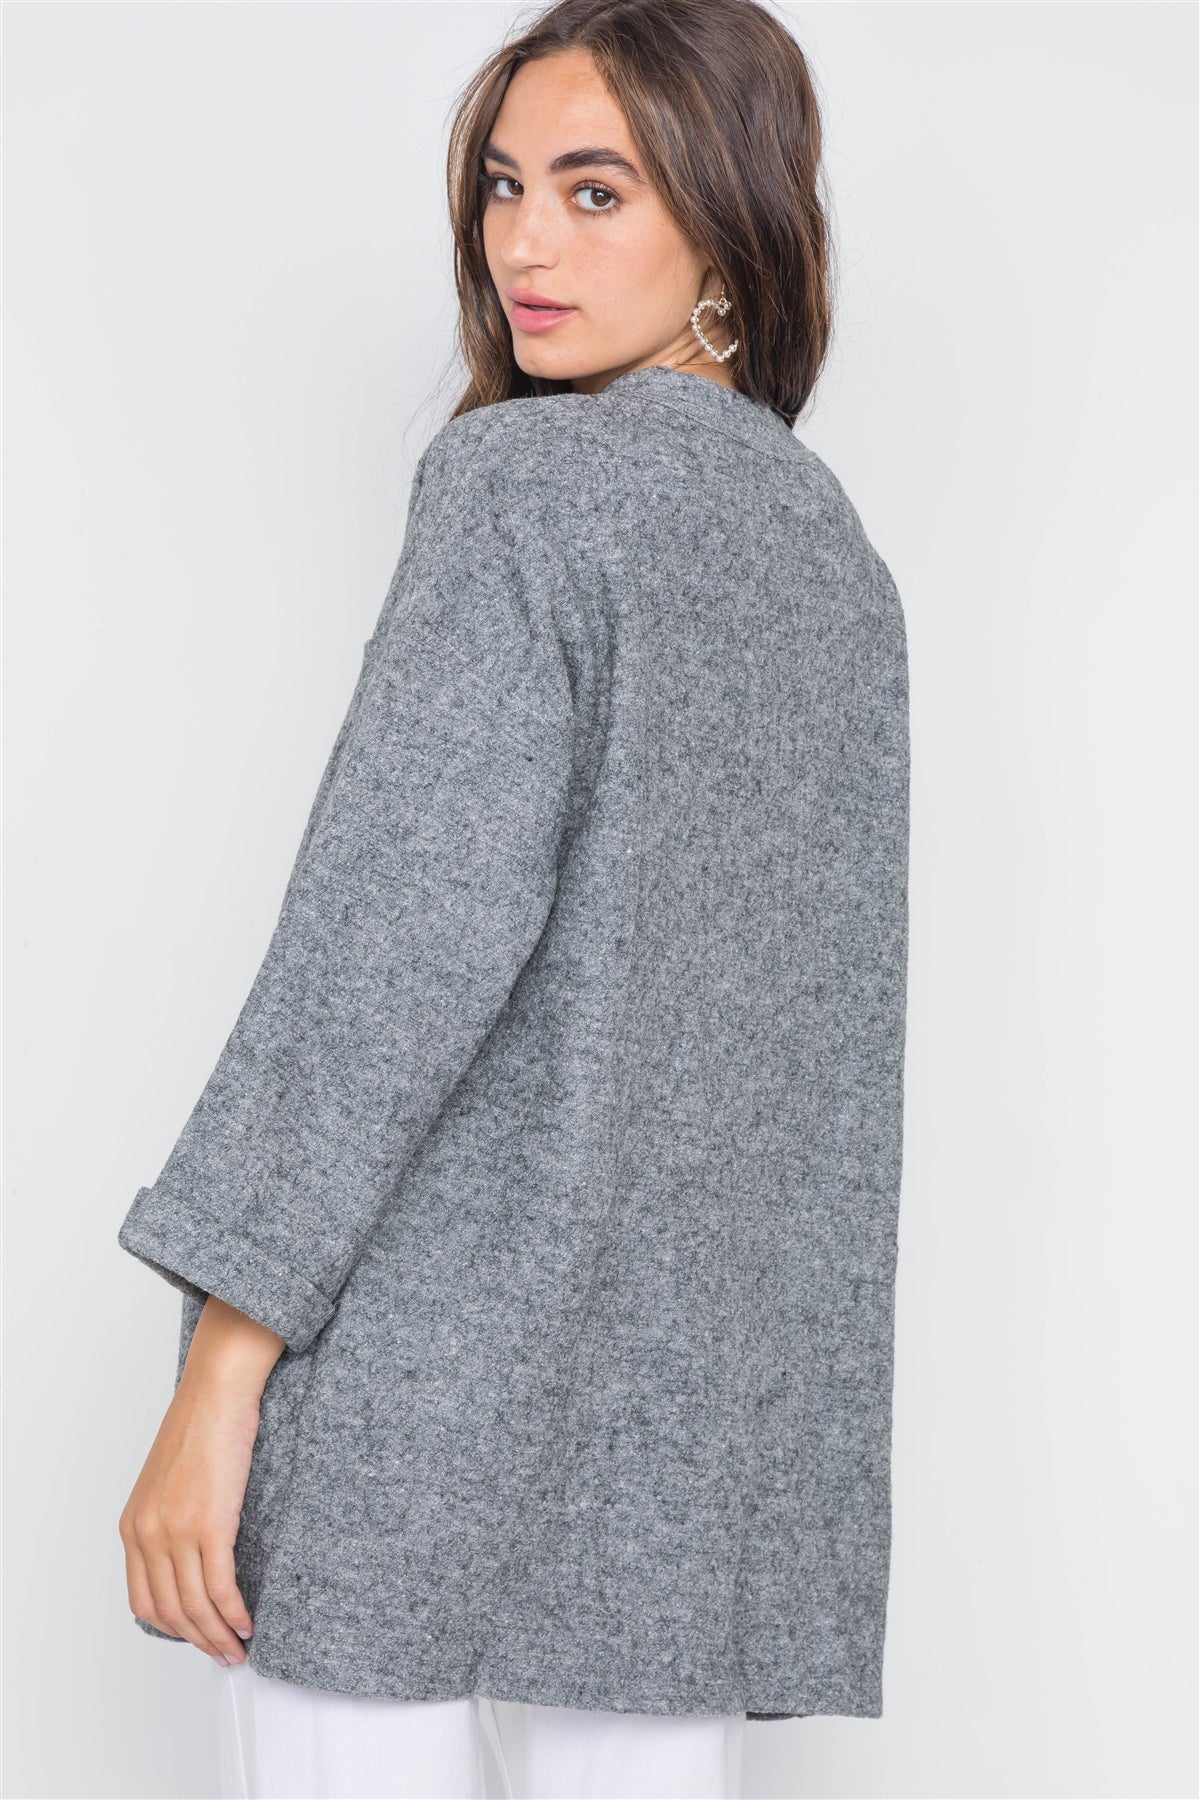 Heather Gray Open Front Cardigan